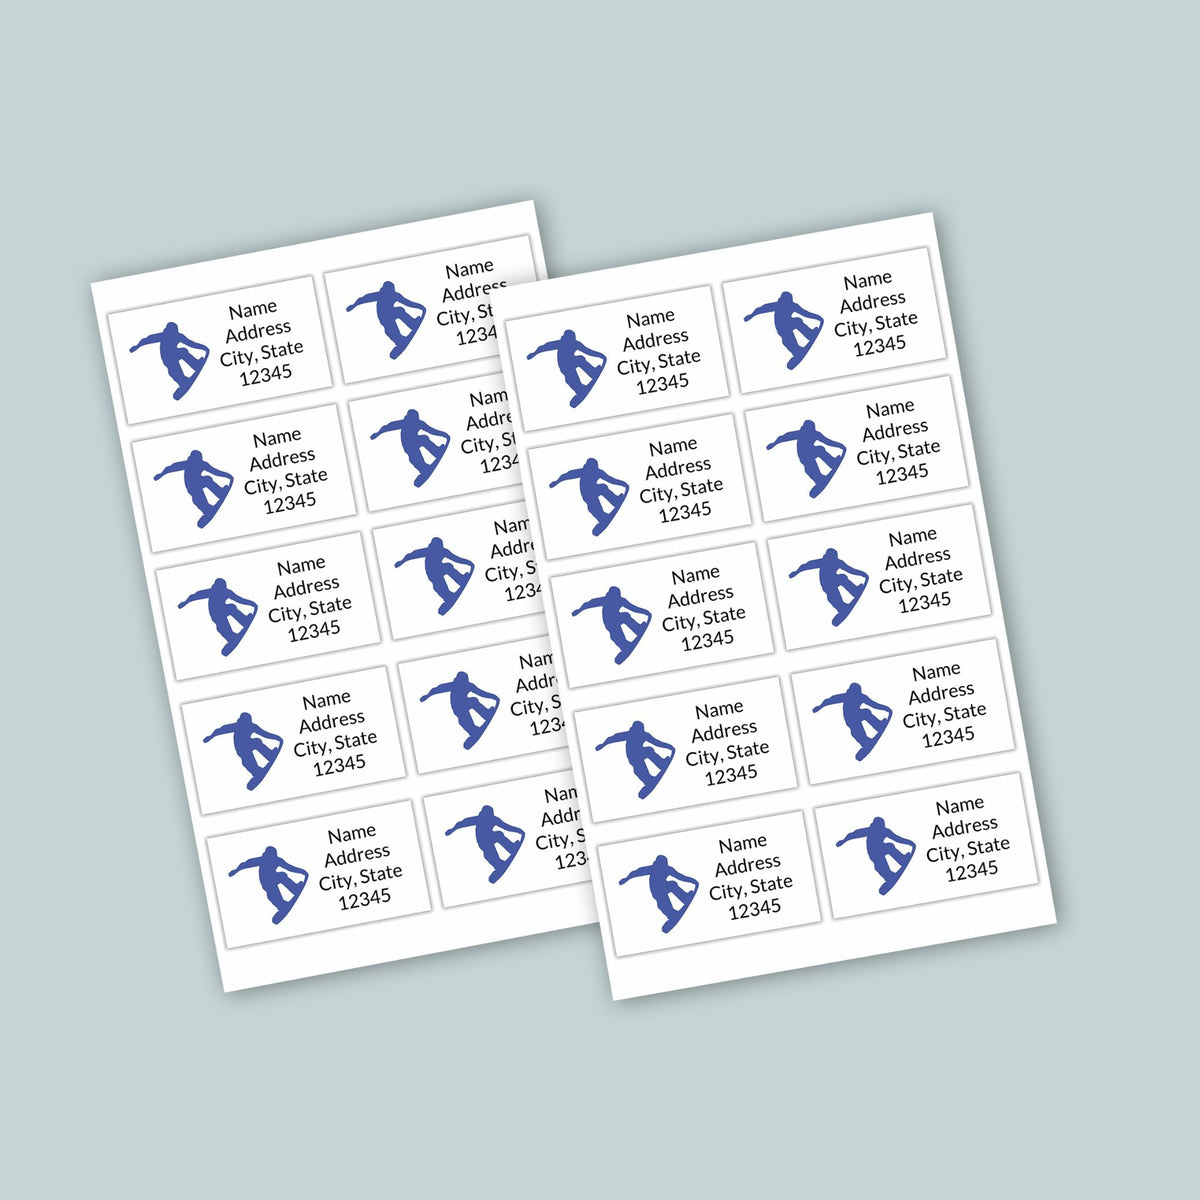 Snowboarder - Personalized Fill-in-the-Blank Thank You Cards - The Note House